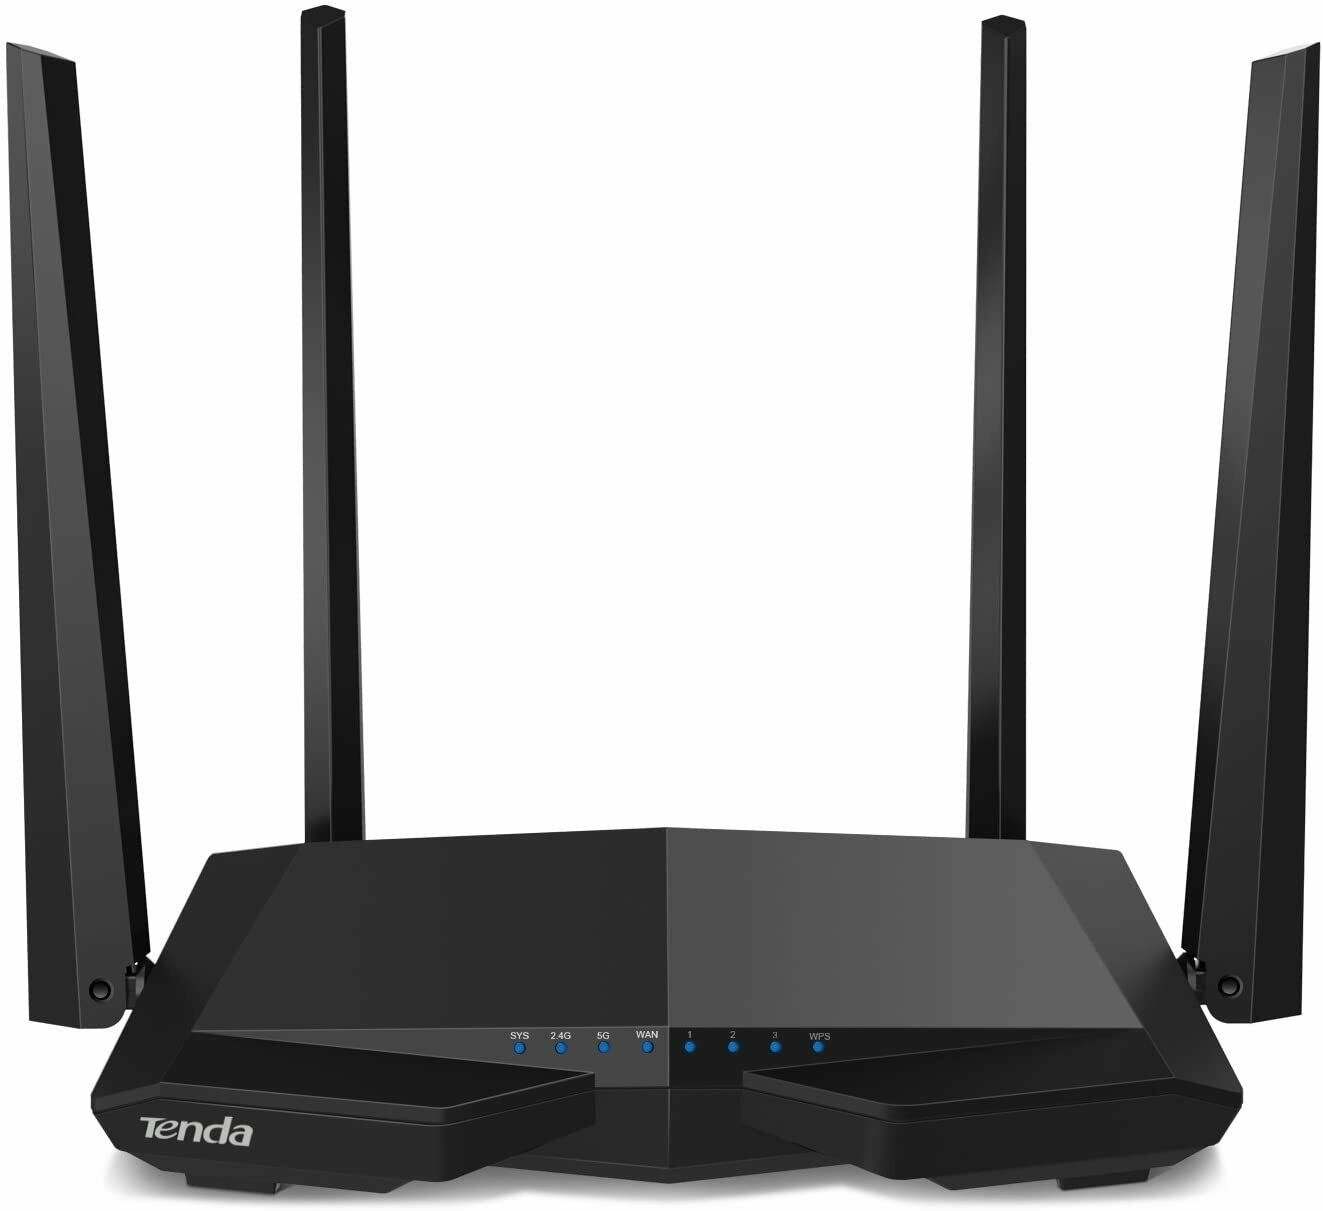 Tenda Ac1200 Dual Band Wifi Router,high Speed Wireless Internet Router Ac6